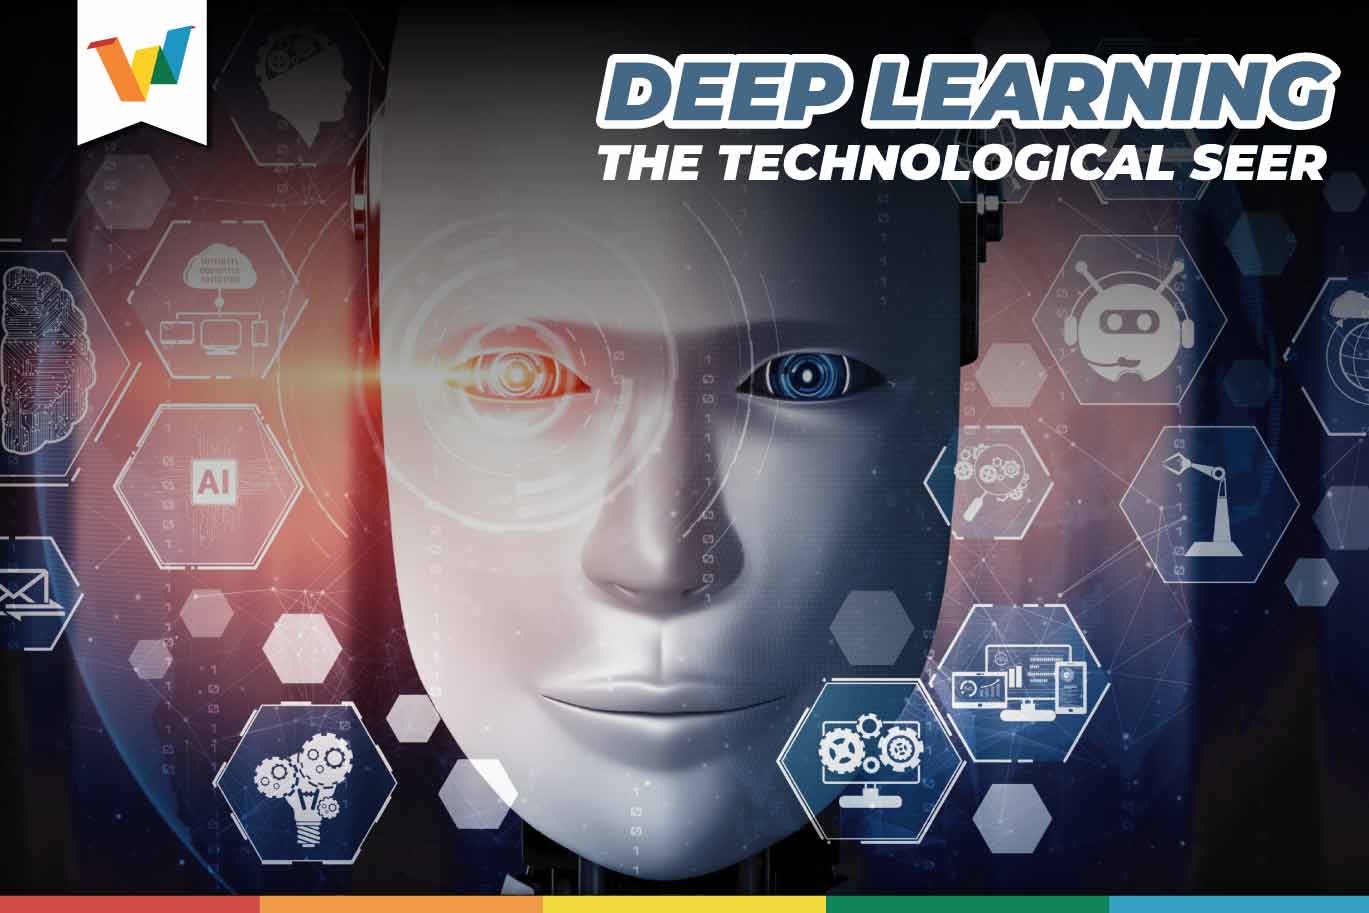 Deep Learning the technological seer